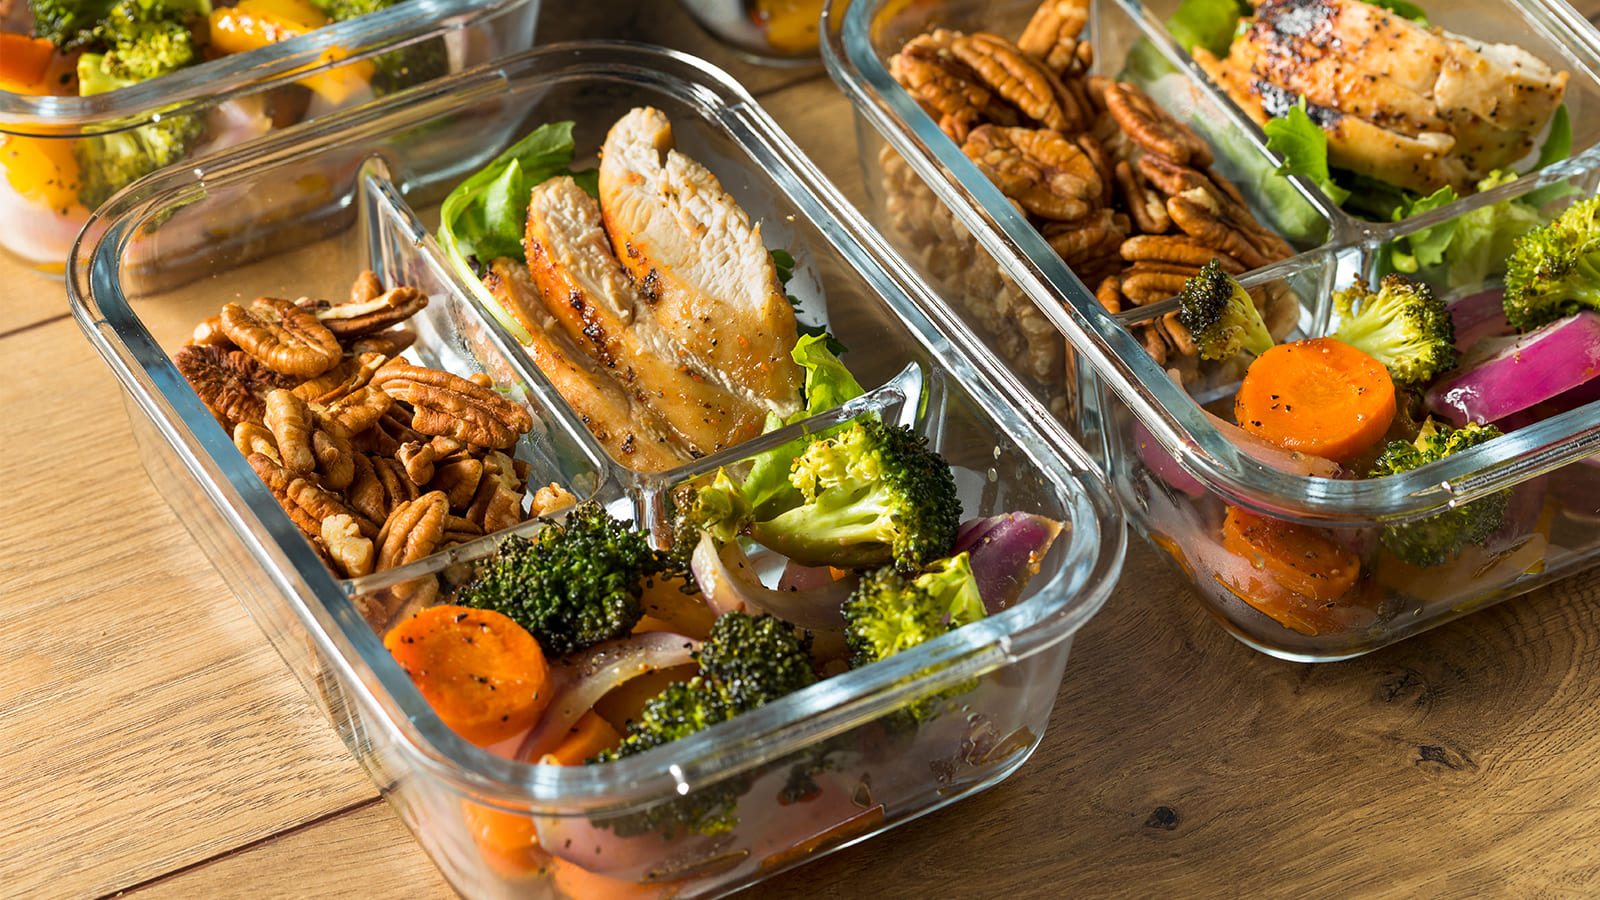 THIS JUST THIN… Meal prepping is key for me (at least for lunches)! E, meal preparation